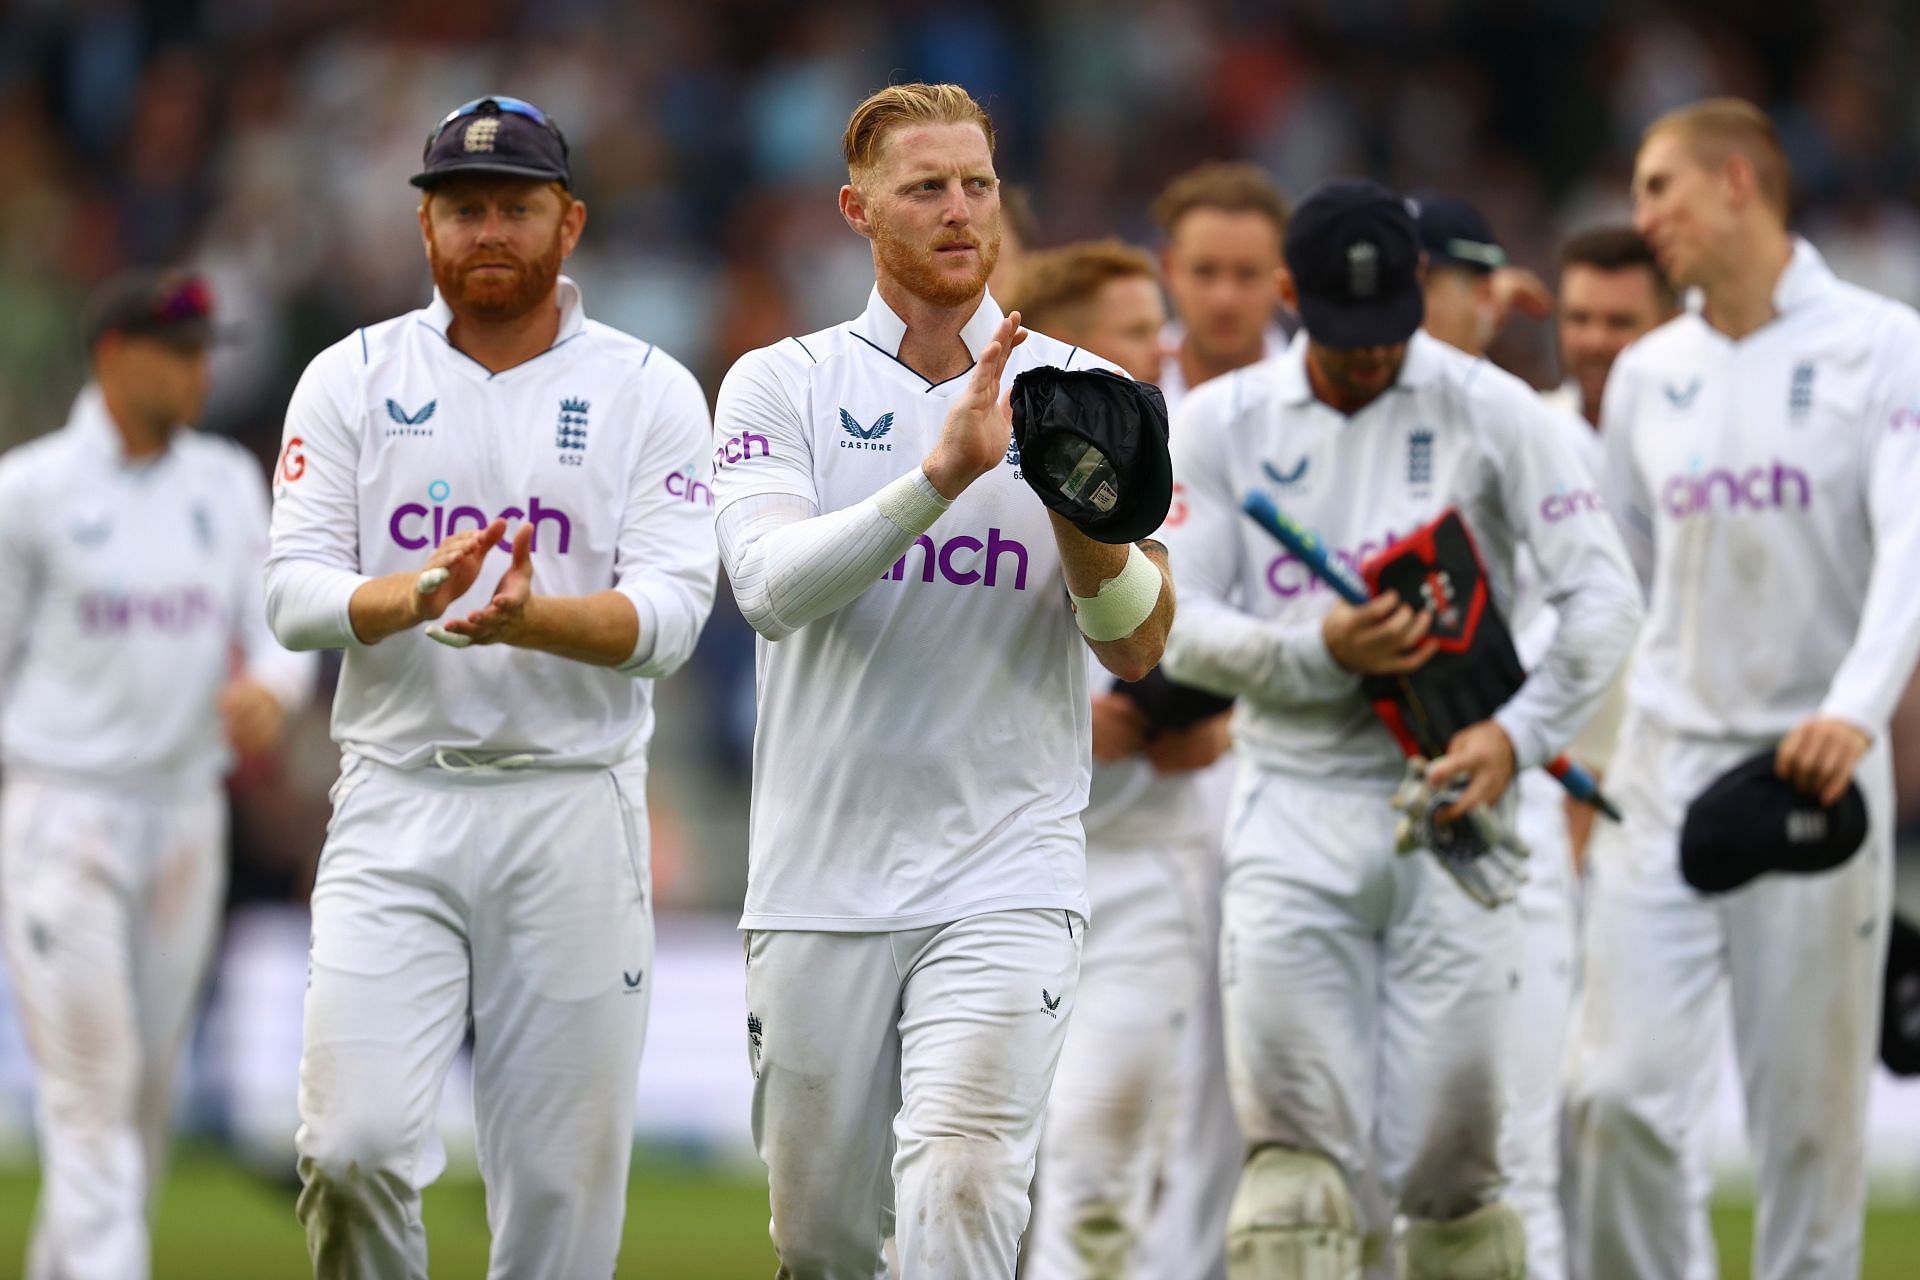 England v South Africa - Second LV= Insurance Test Match: Day Three